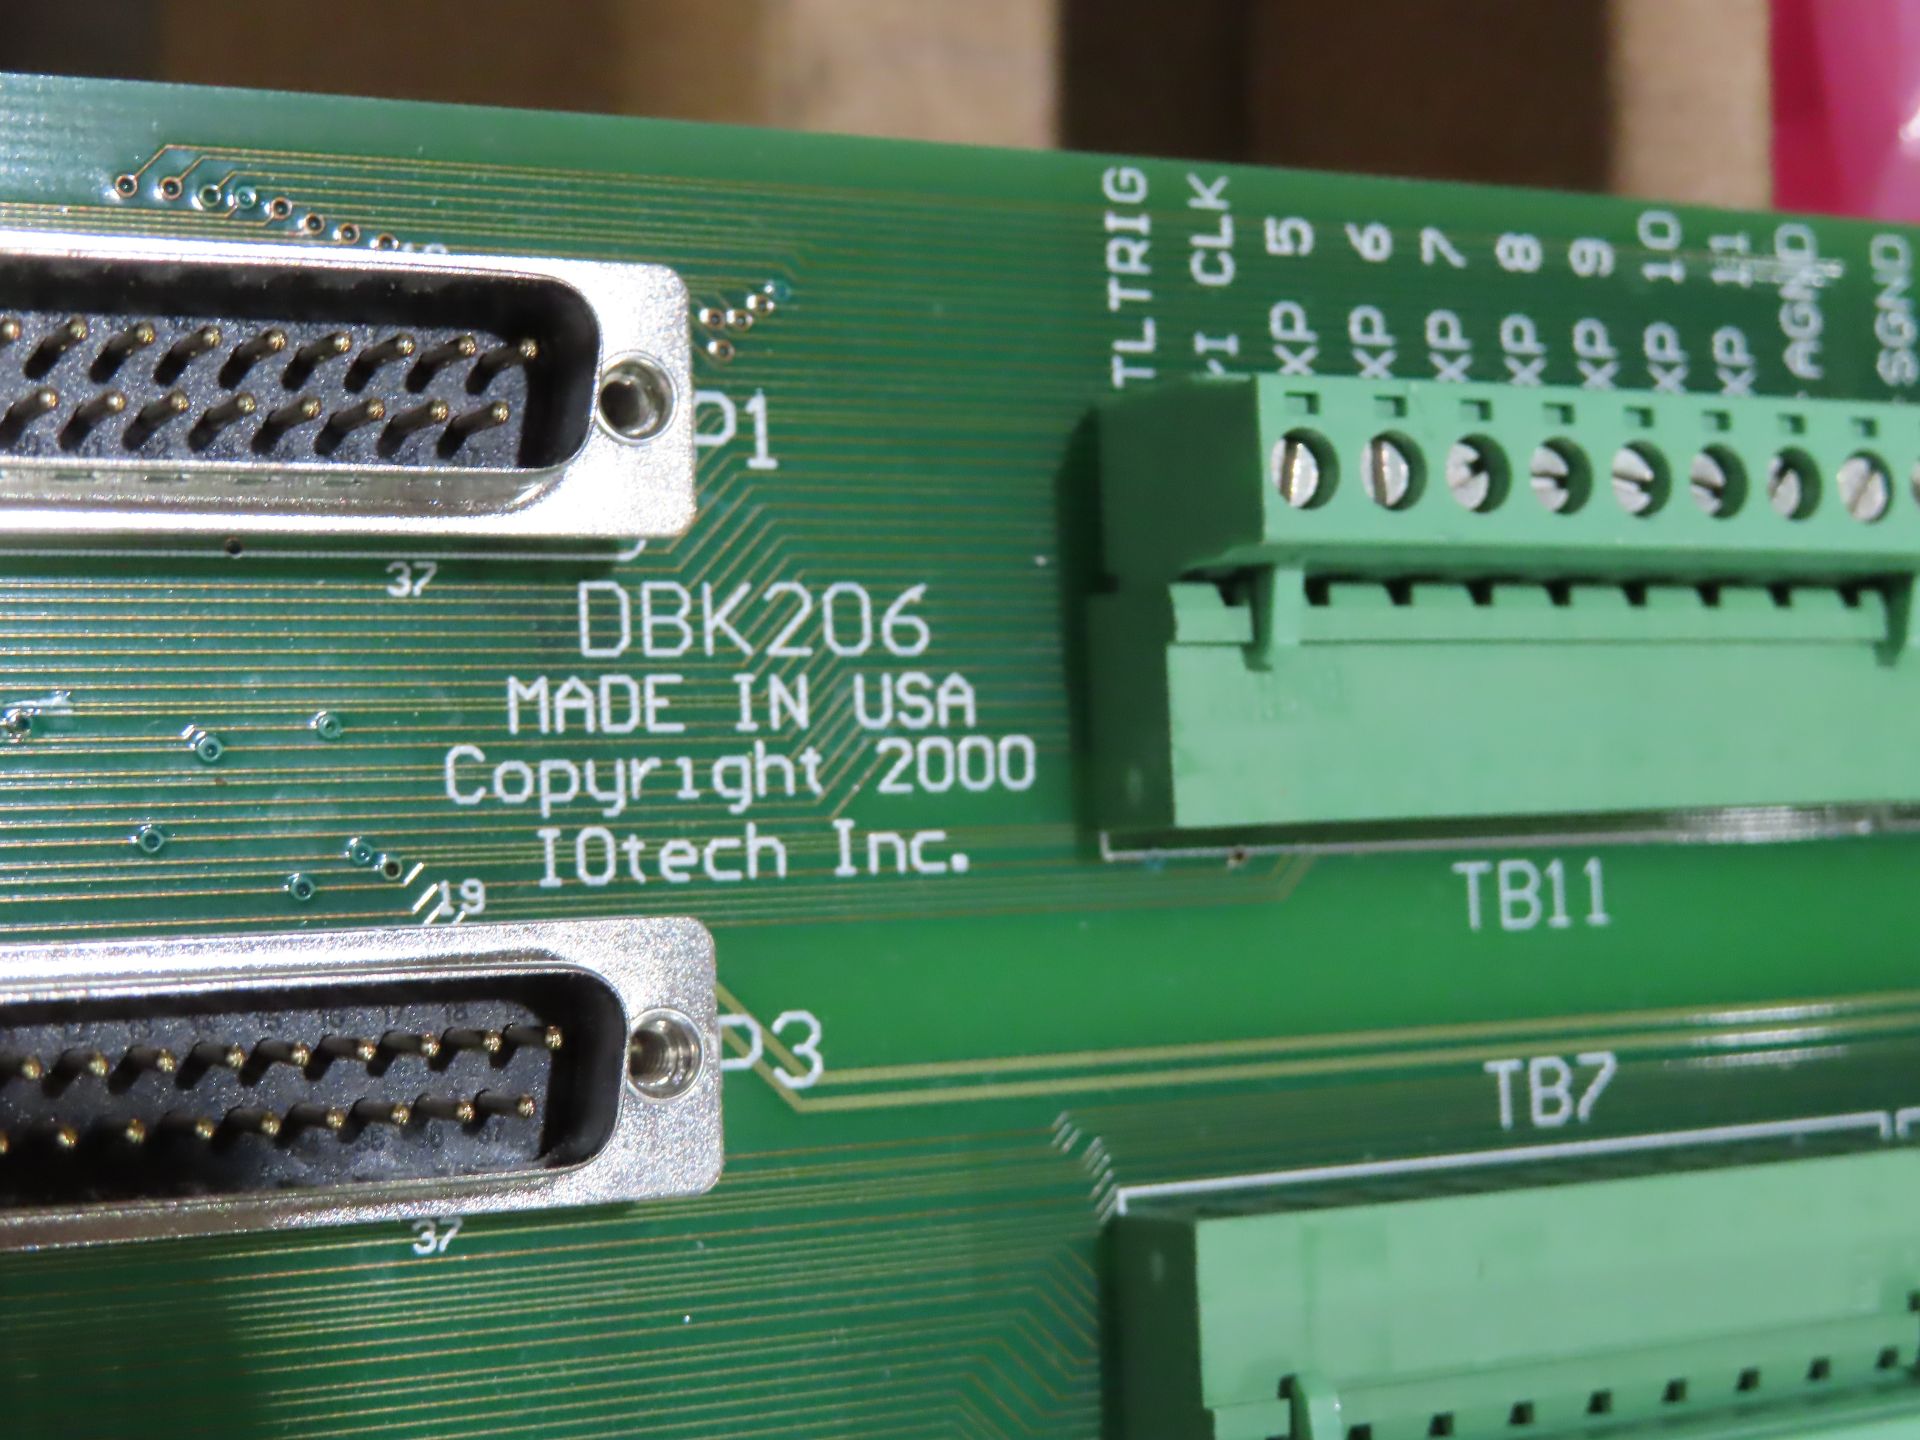 Iotech DBK206, 1060-0435 board, as always, with Brolyn LLC auctions, all lots can be picked up - Image 2 of 2